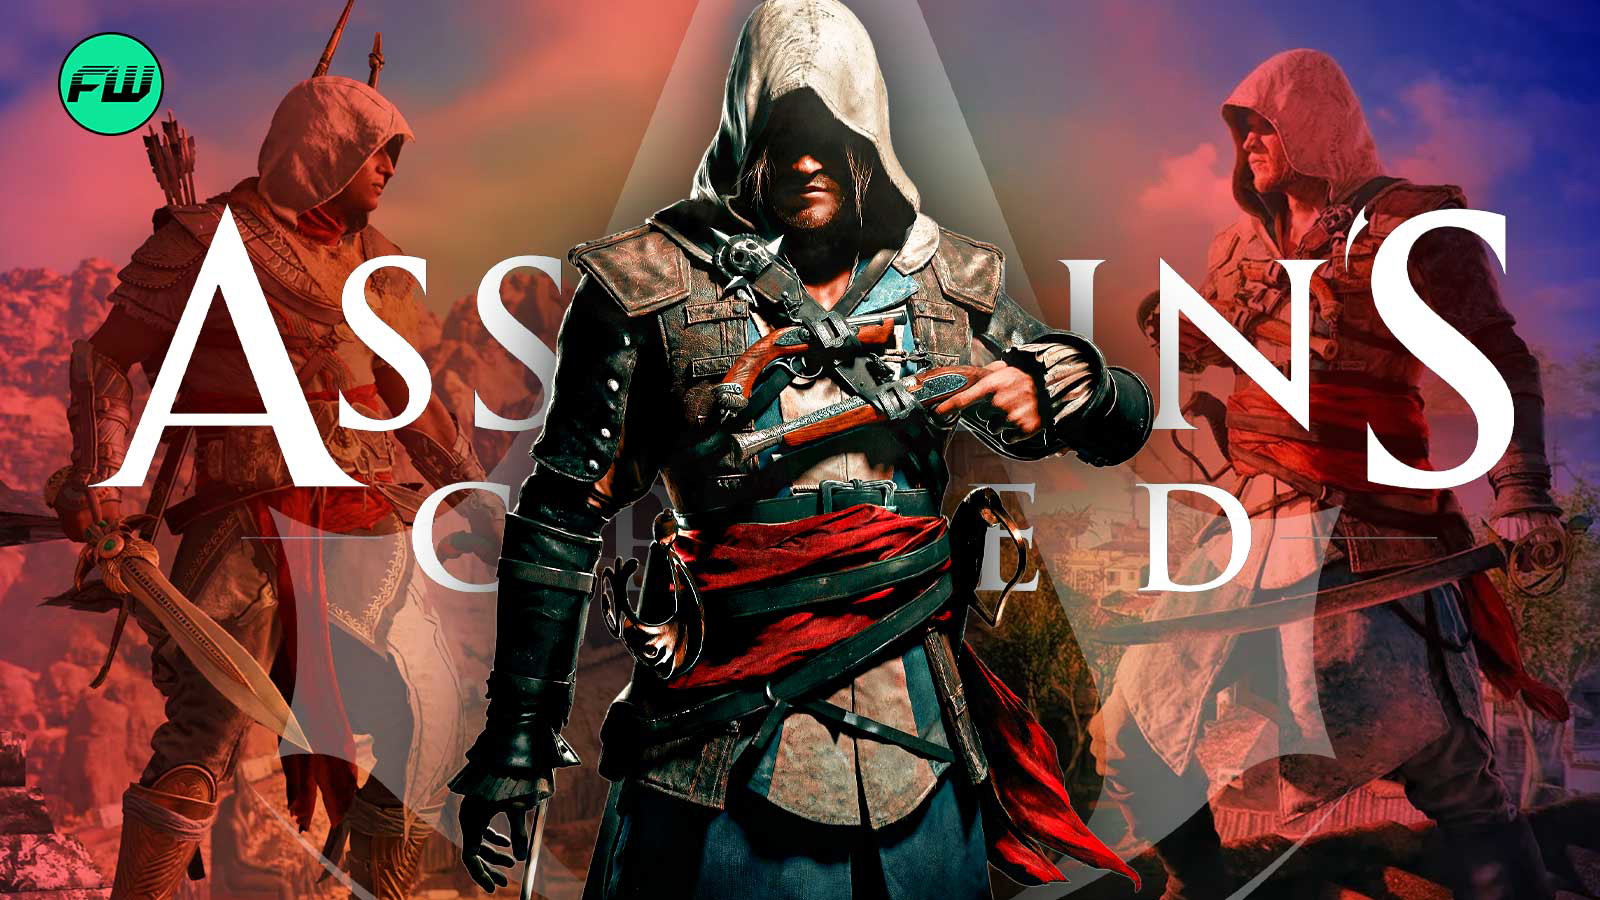 assassin’s creed games ranked